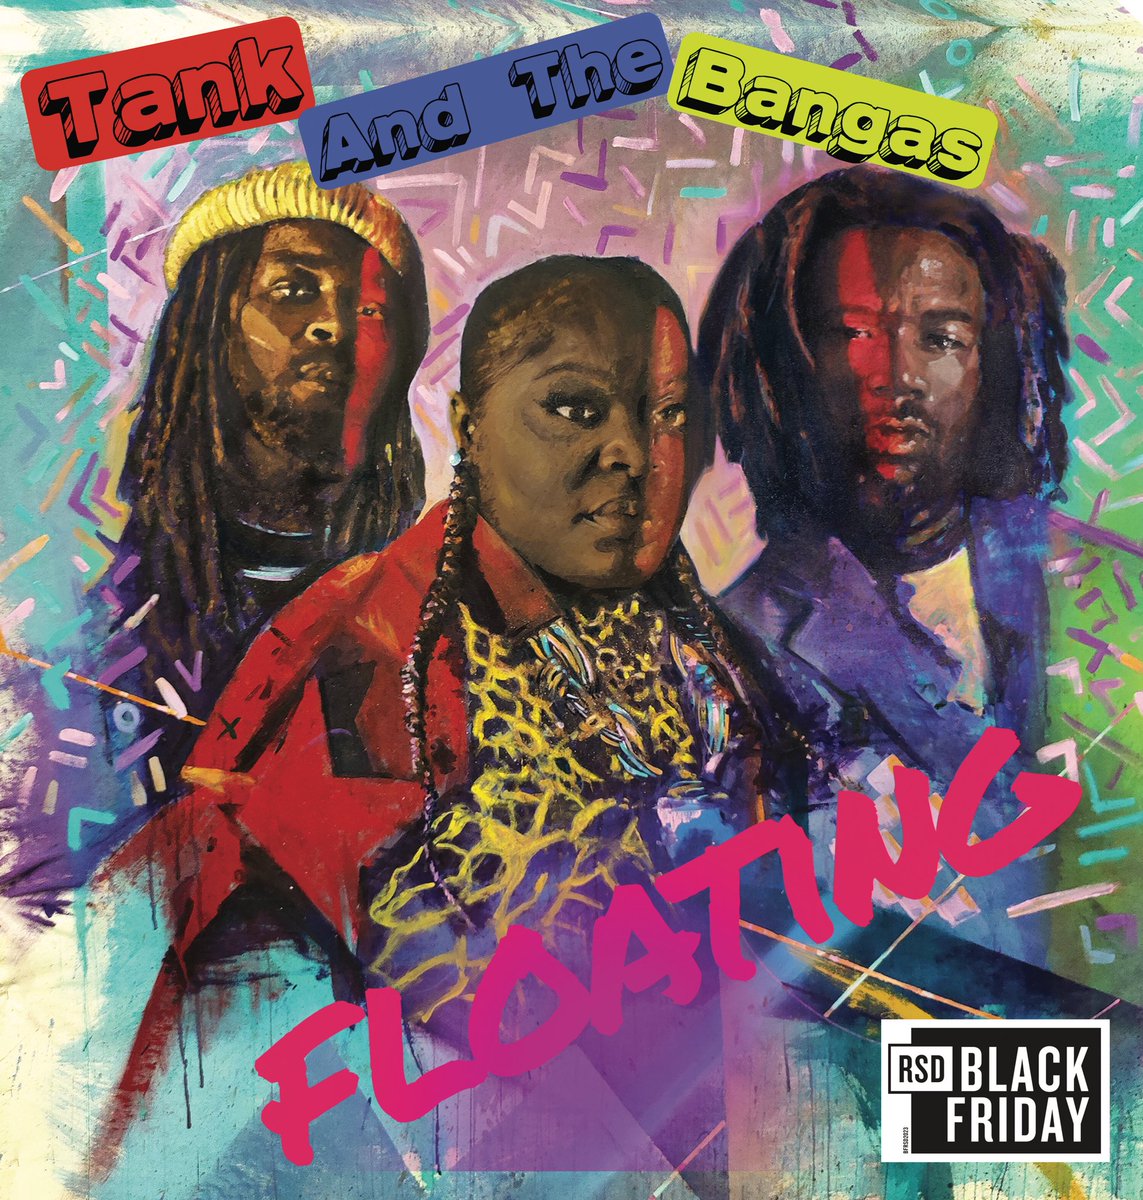 “Support your local record store and pick up this special release on Black Friday. Find more info and a participating indie record stores near you at recordstoreday.com (recordstoreday.com)”' #RSDBlackFriday #RSDBF #FLOATING #TankandTheBangas @recordstoreday